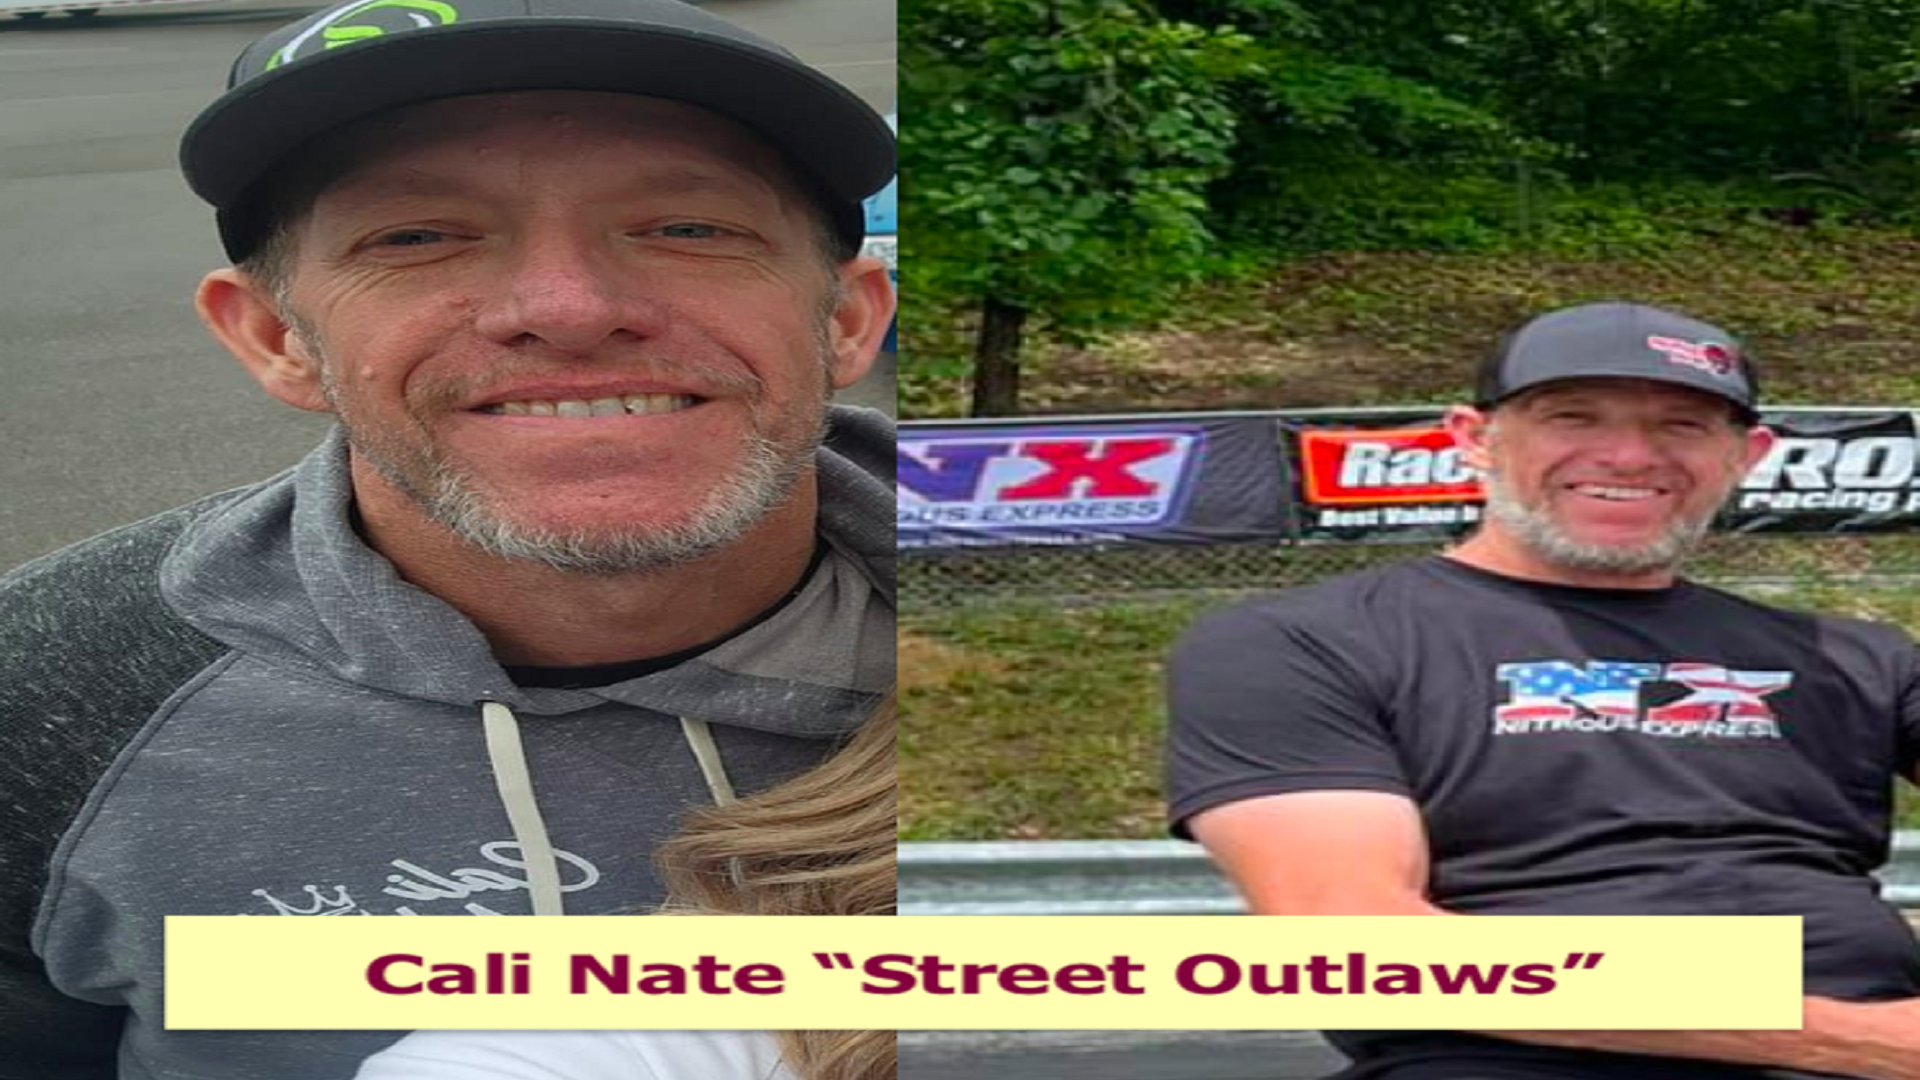 Cali Nate Street Outlaws Racer died in Crash